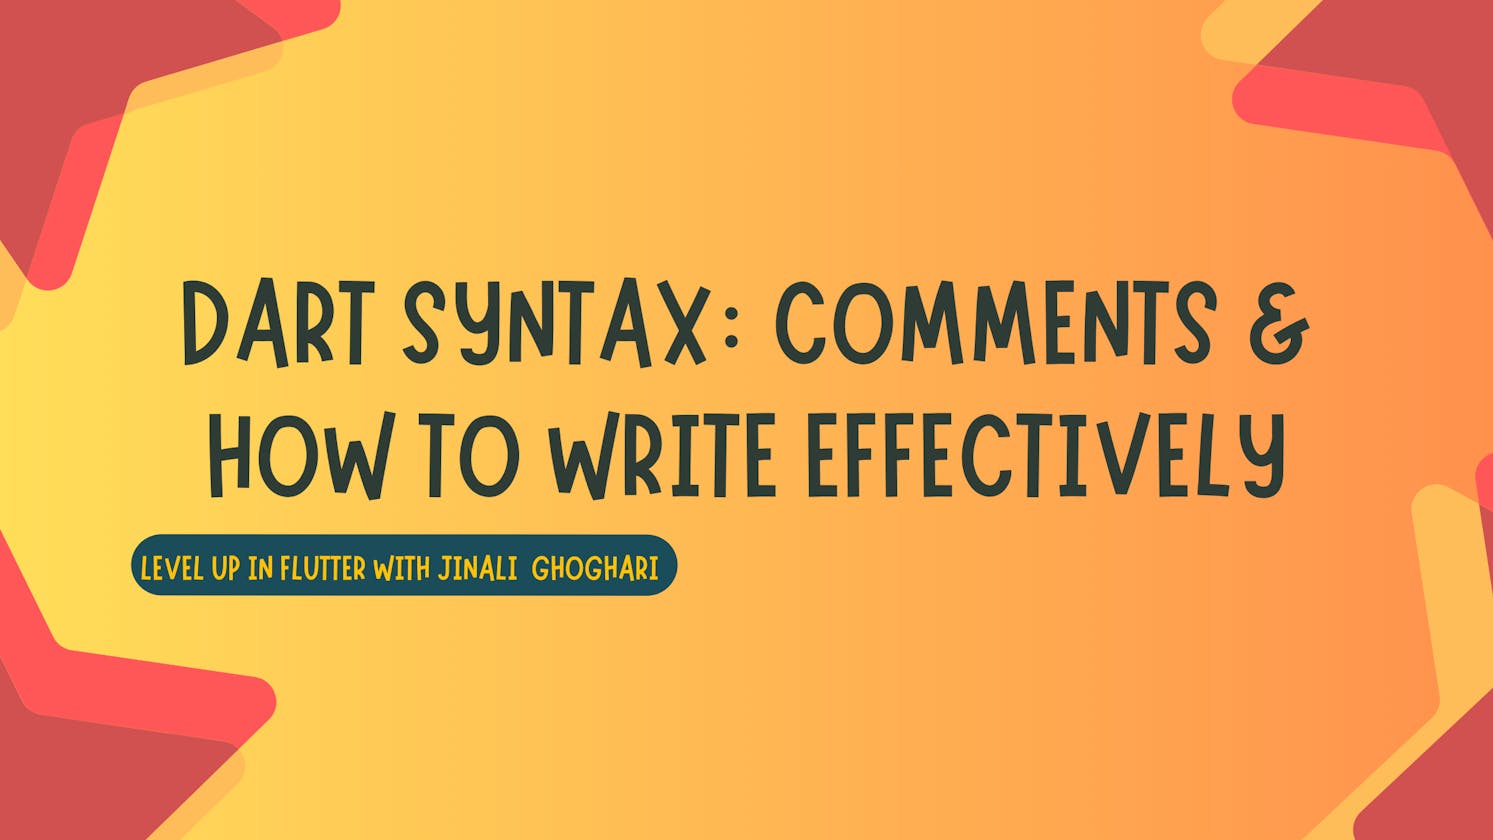 Dart Syntax: Comments & How to Write effectively